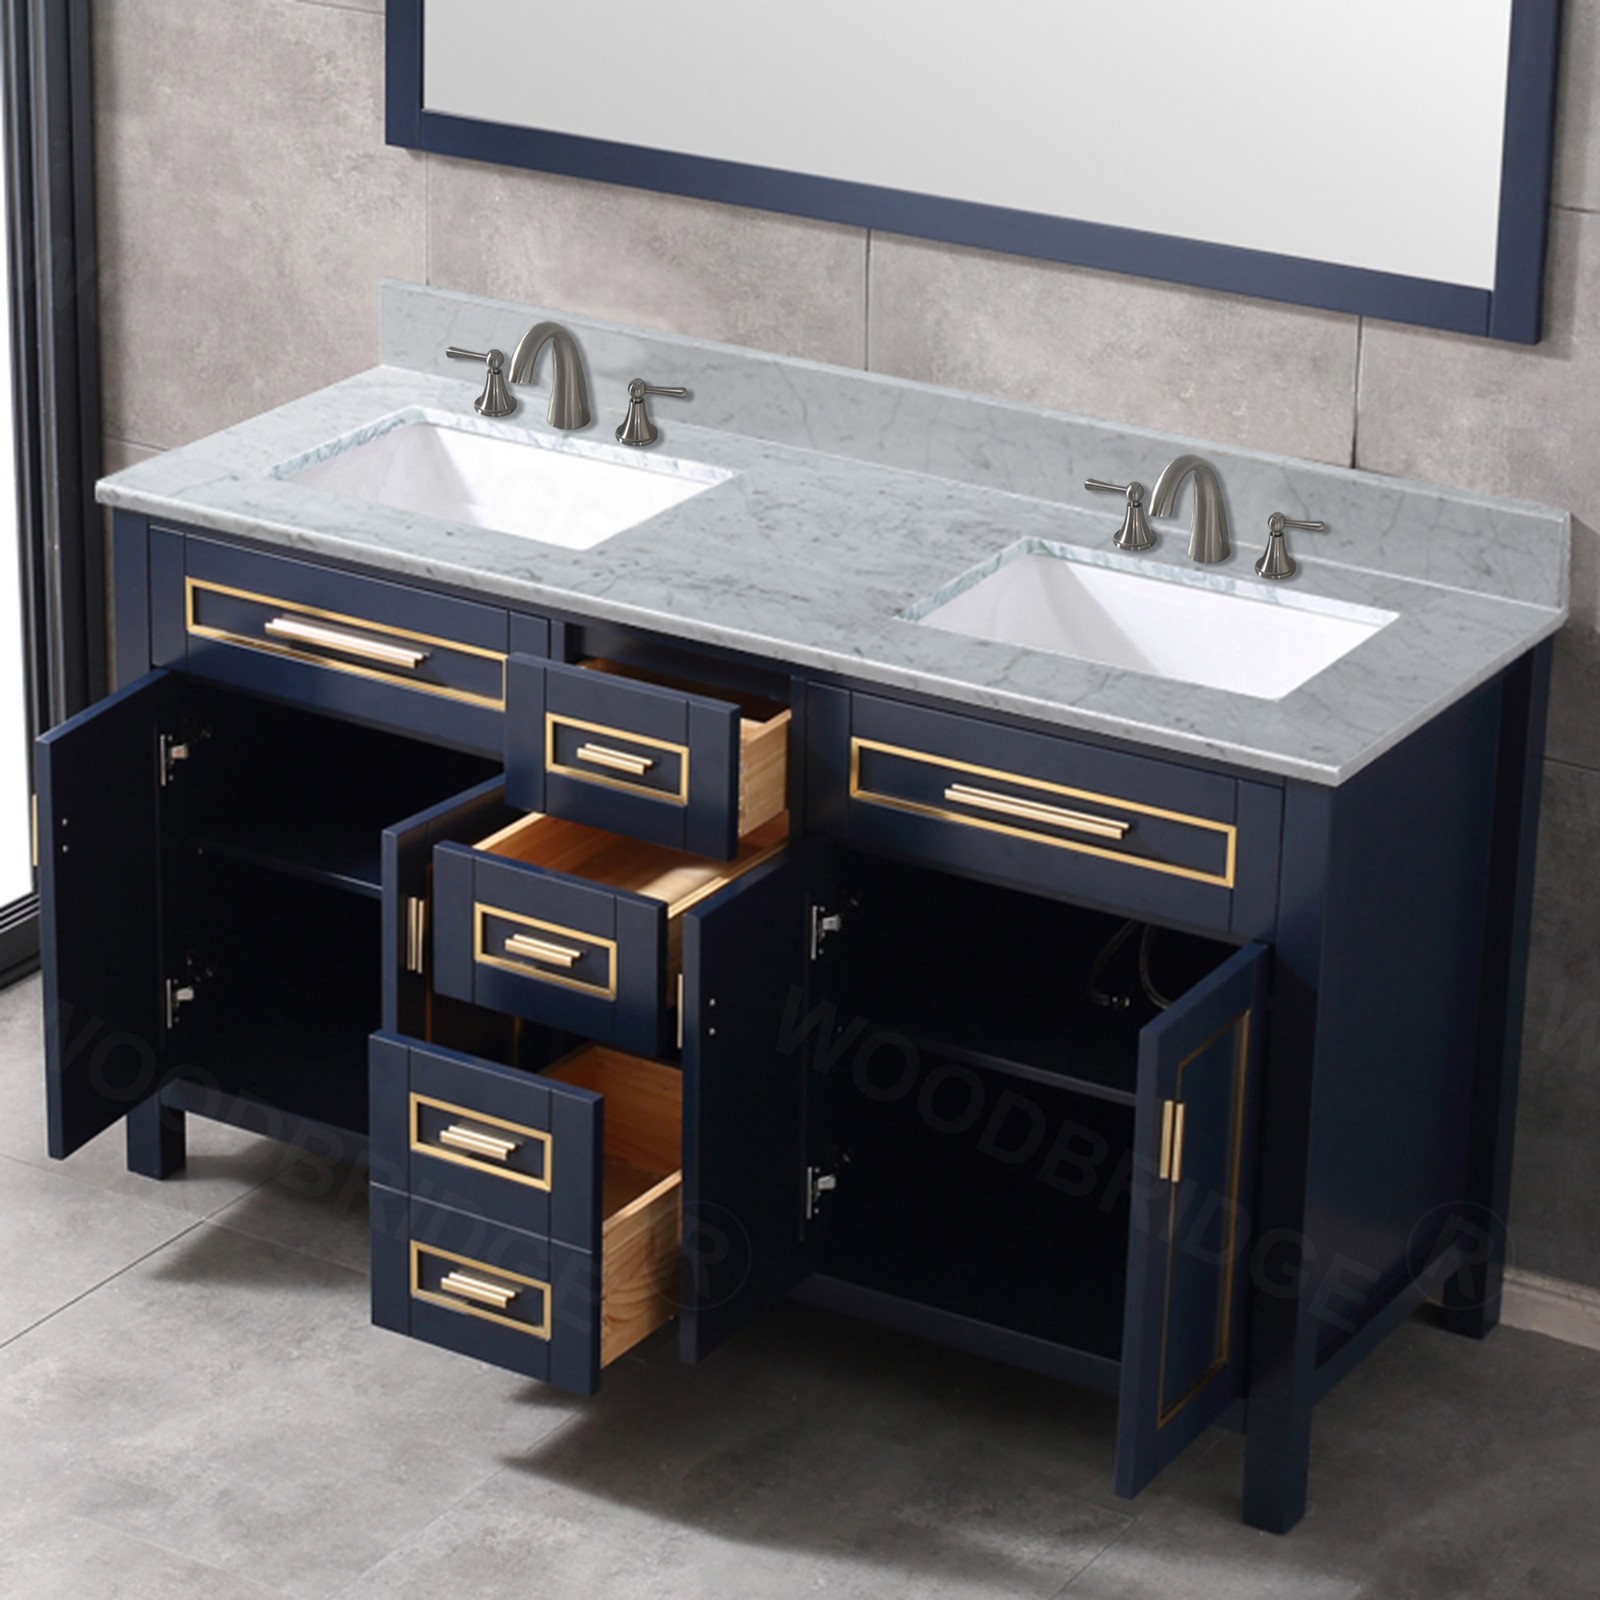  WOODBRIDGE Milan  61” Floor Mounted Single Basin Vanity Set with Solid Wood Cabinet in Navy Blue, and Carrara White Marble Vanity Top with Pre-installed Undermount Rectangle Bathroom Sink in White, Pre-Drilled 3-Hole for 4-inch Centerset Faucet_4656